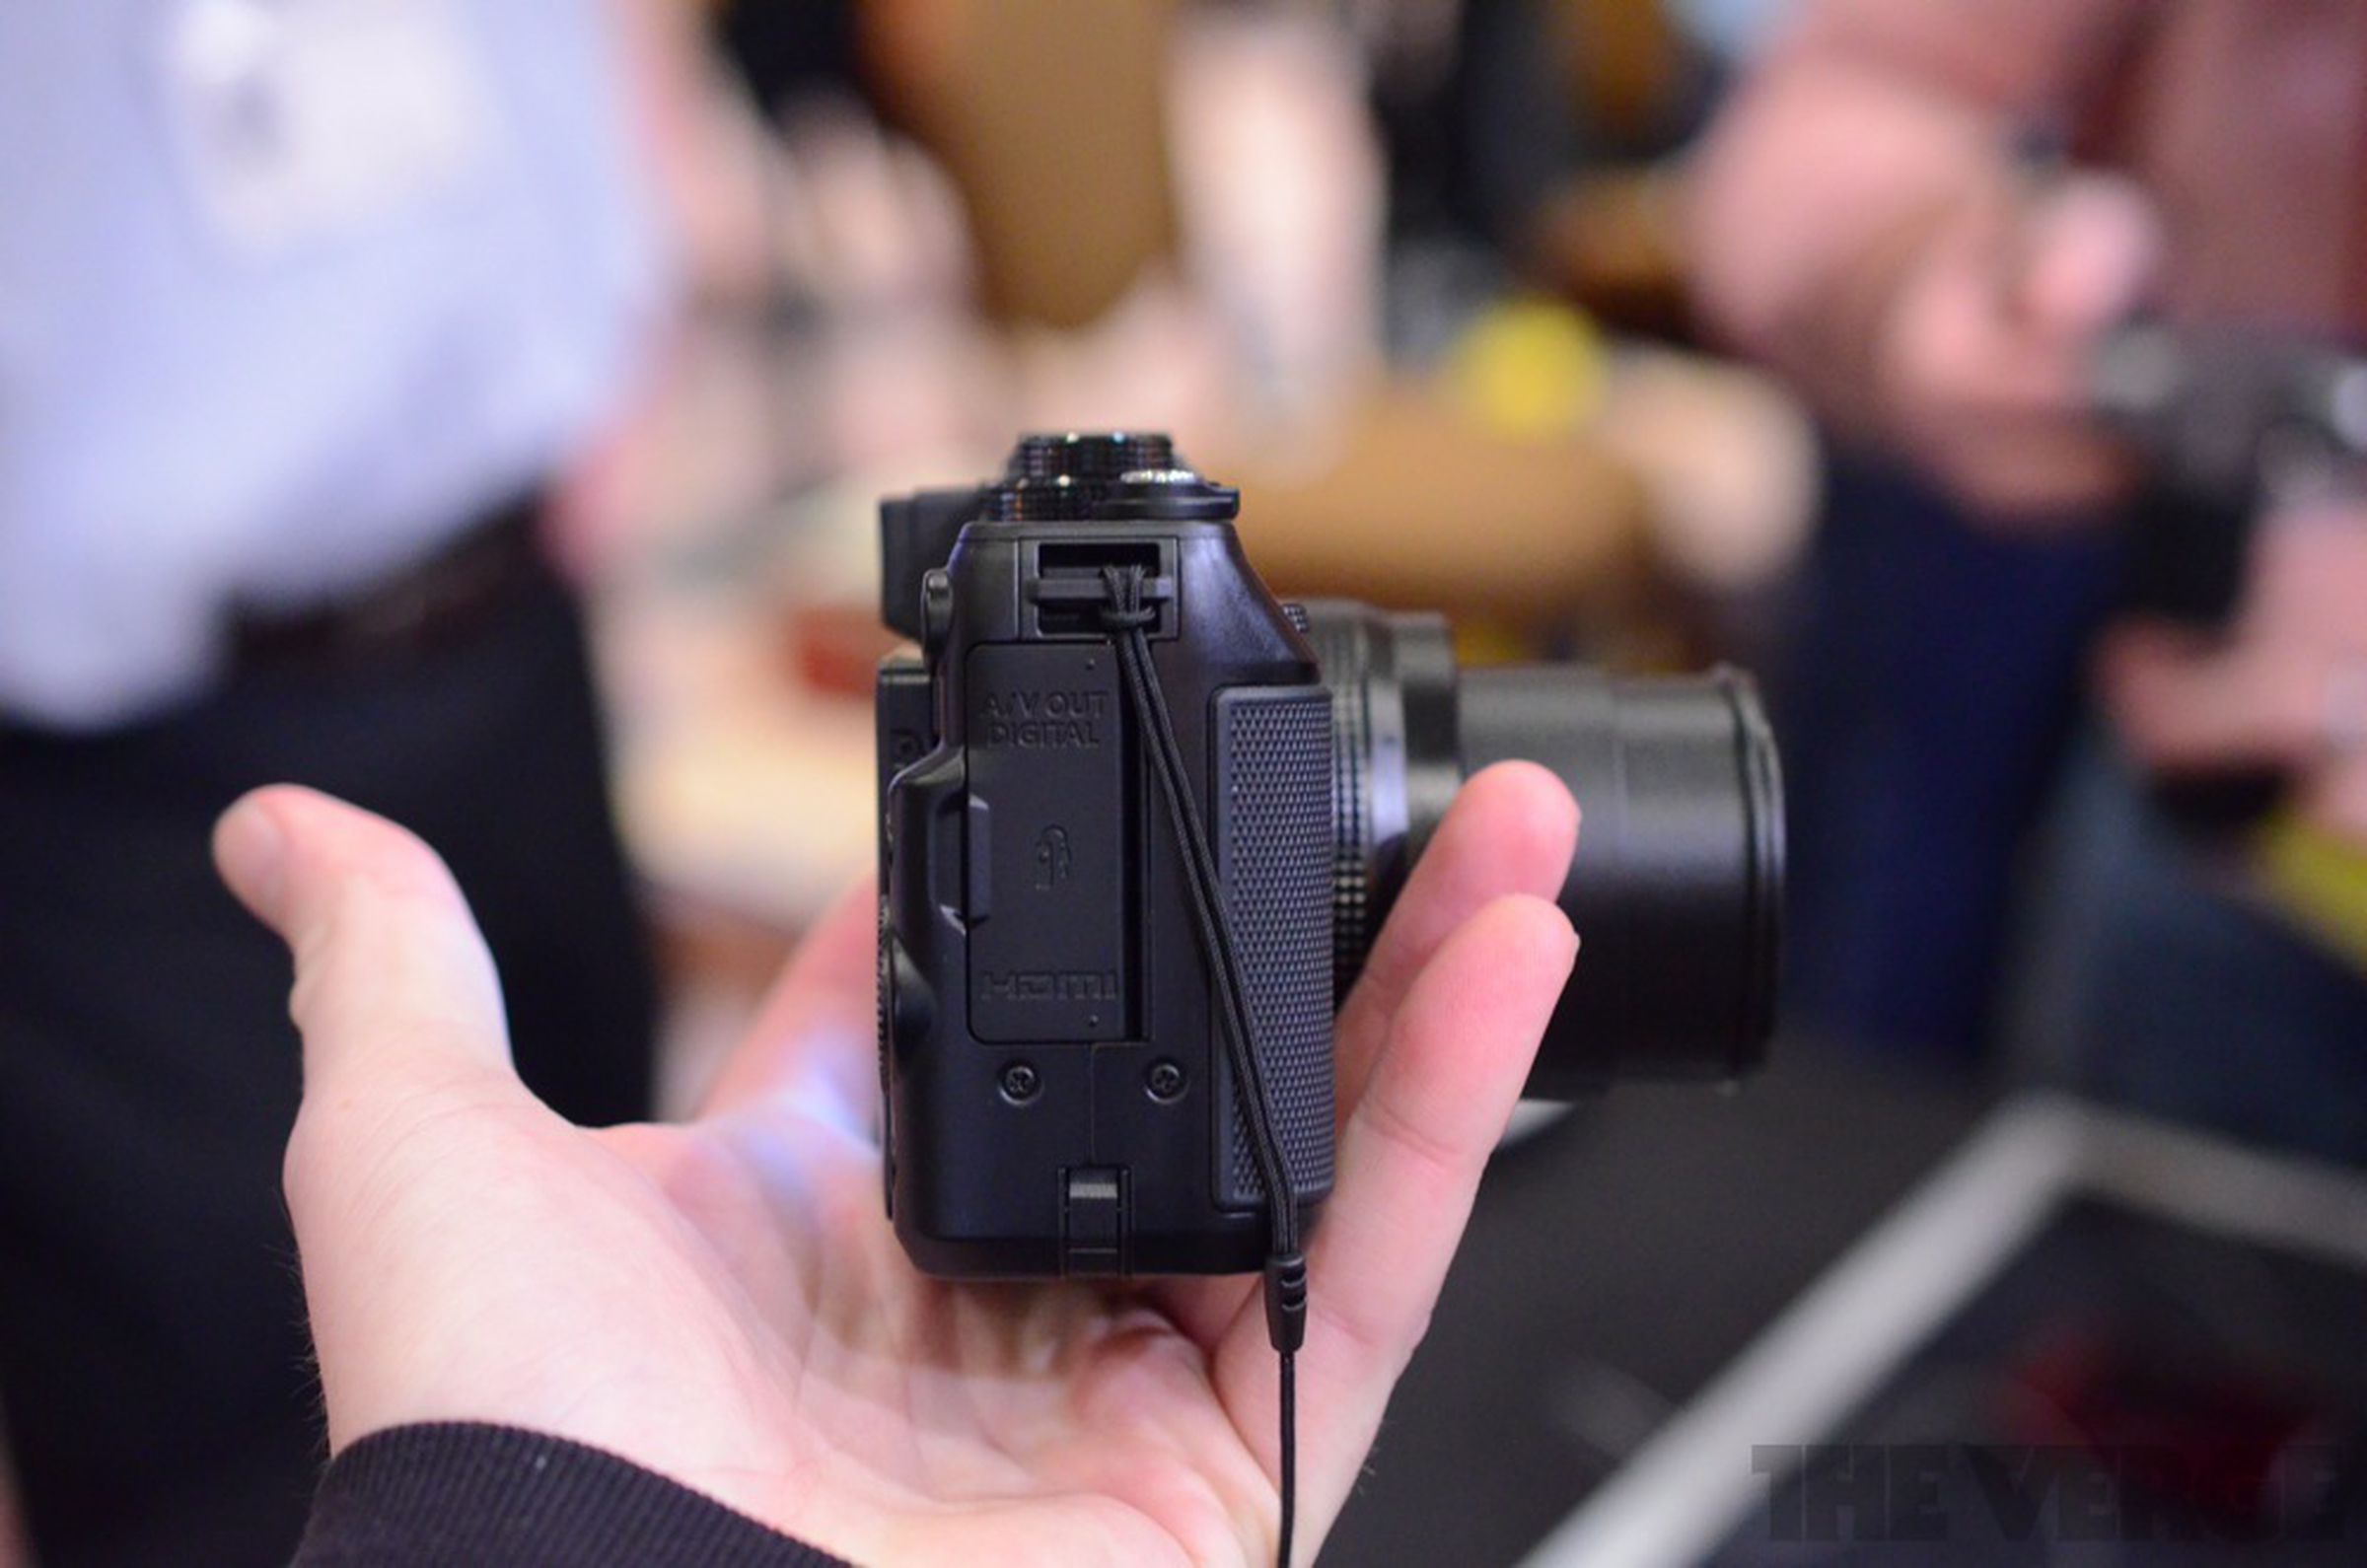 Canon PowerShot G1 X hands-on pictures